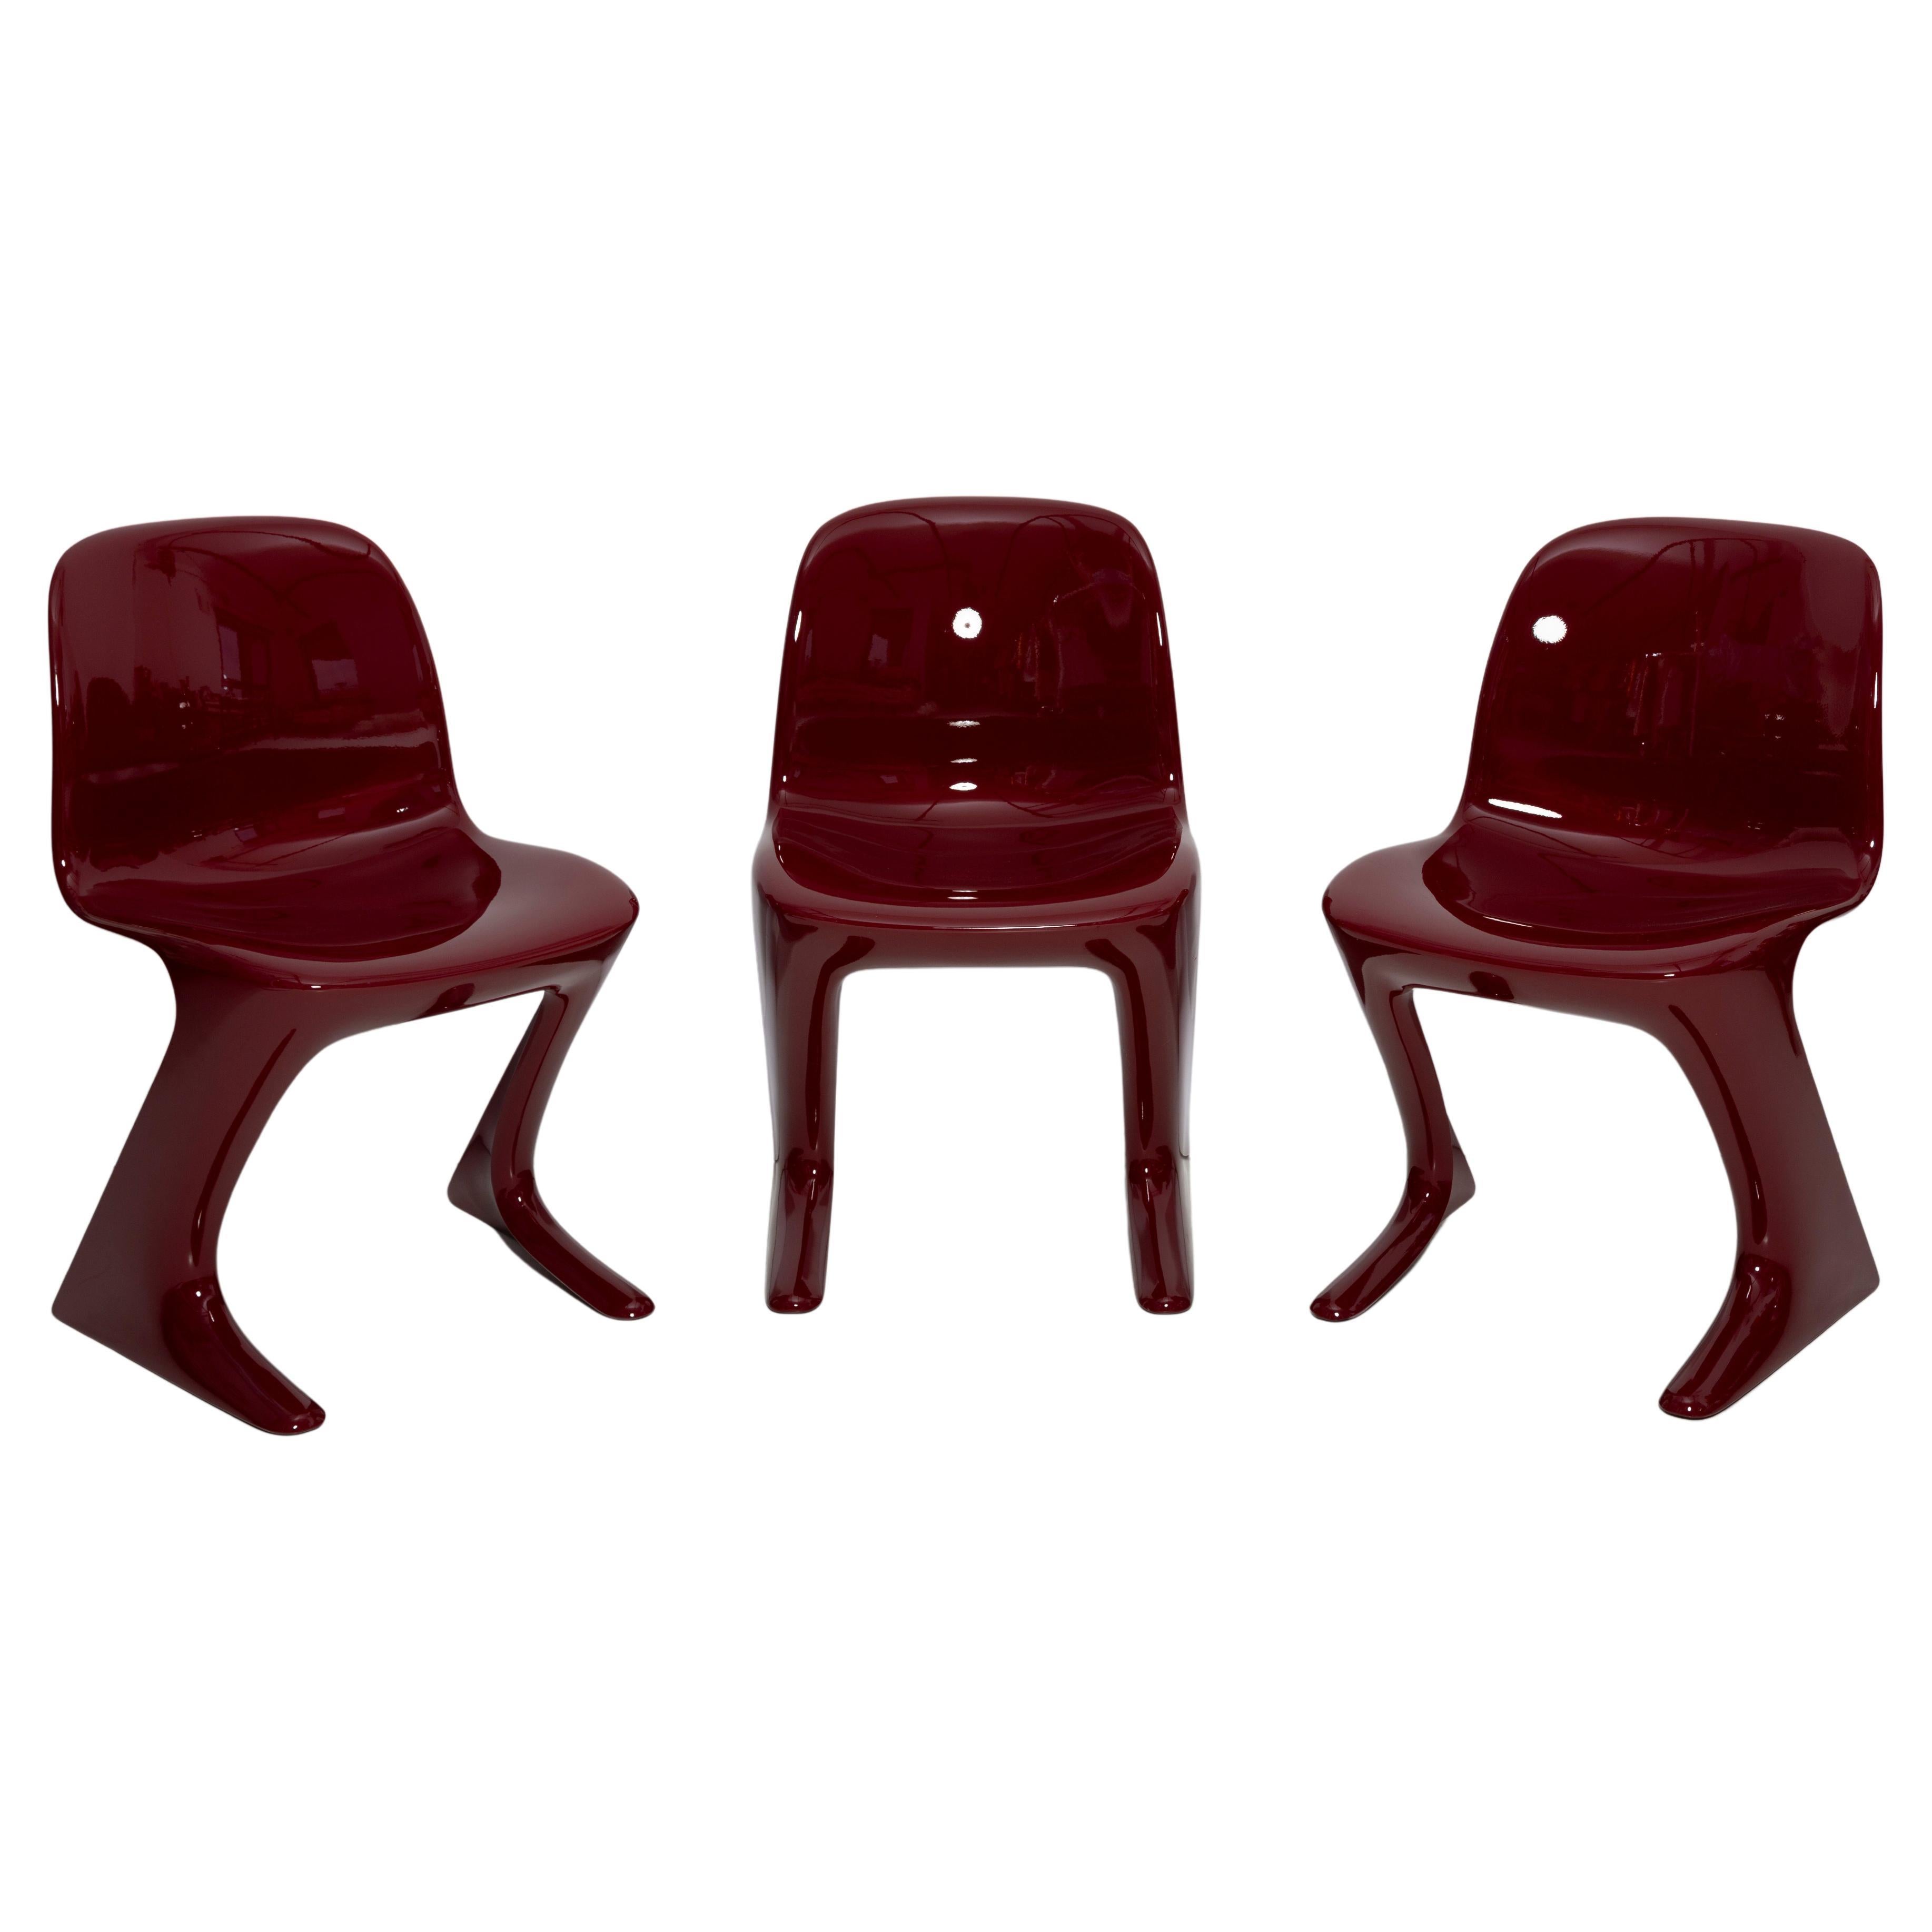 Set of Three Red Wine Kangaroo Chairs Designed by Ernst Moeckl, Germany, 1968 For Sale